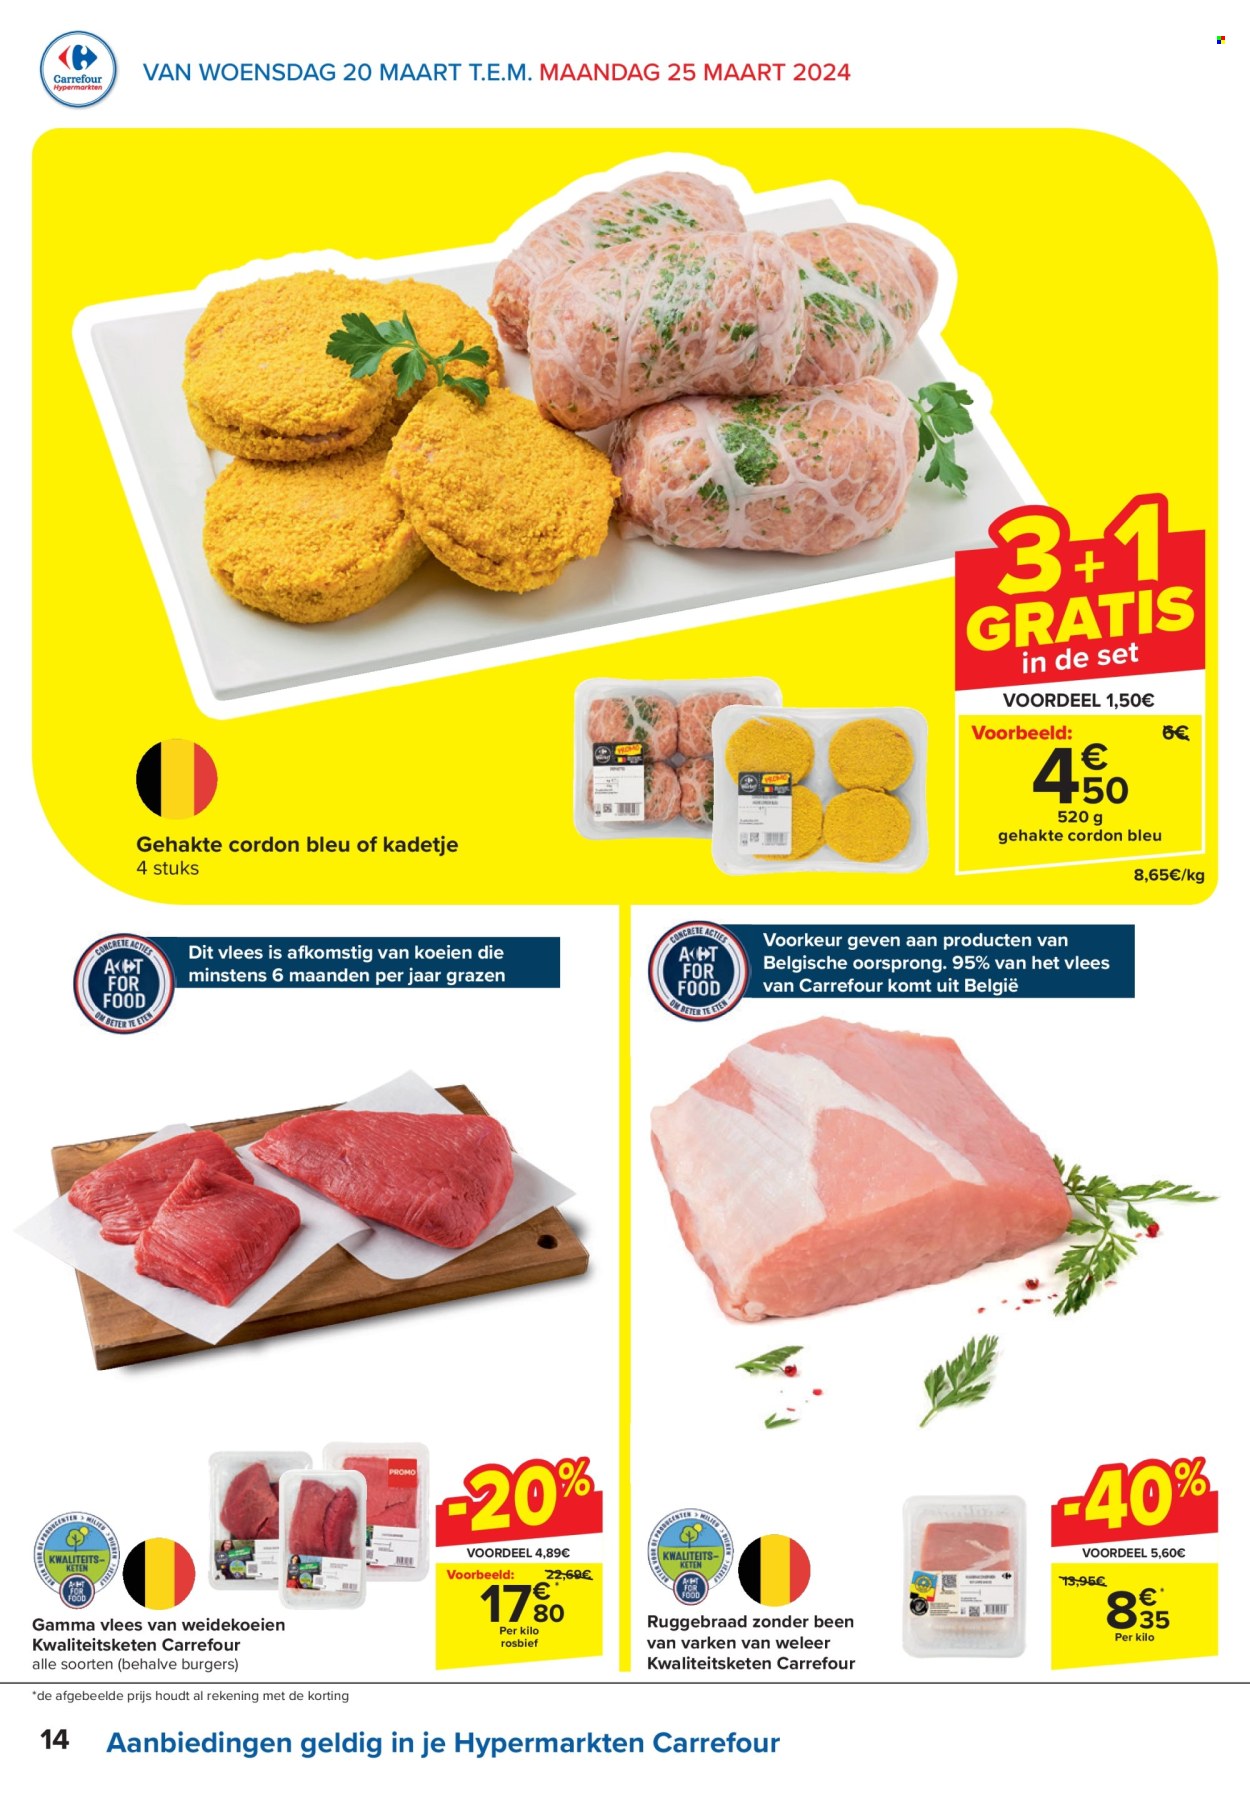 Catalogue Carrefour hypermarkt - 20.3.2024 - 2.4.2024. Page 14.